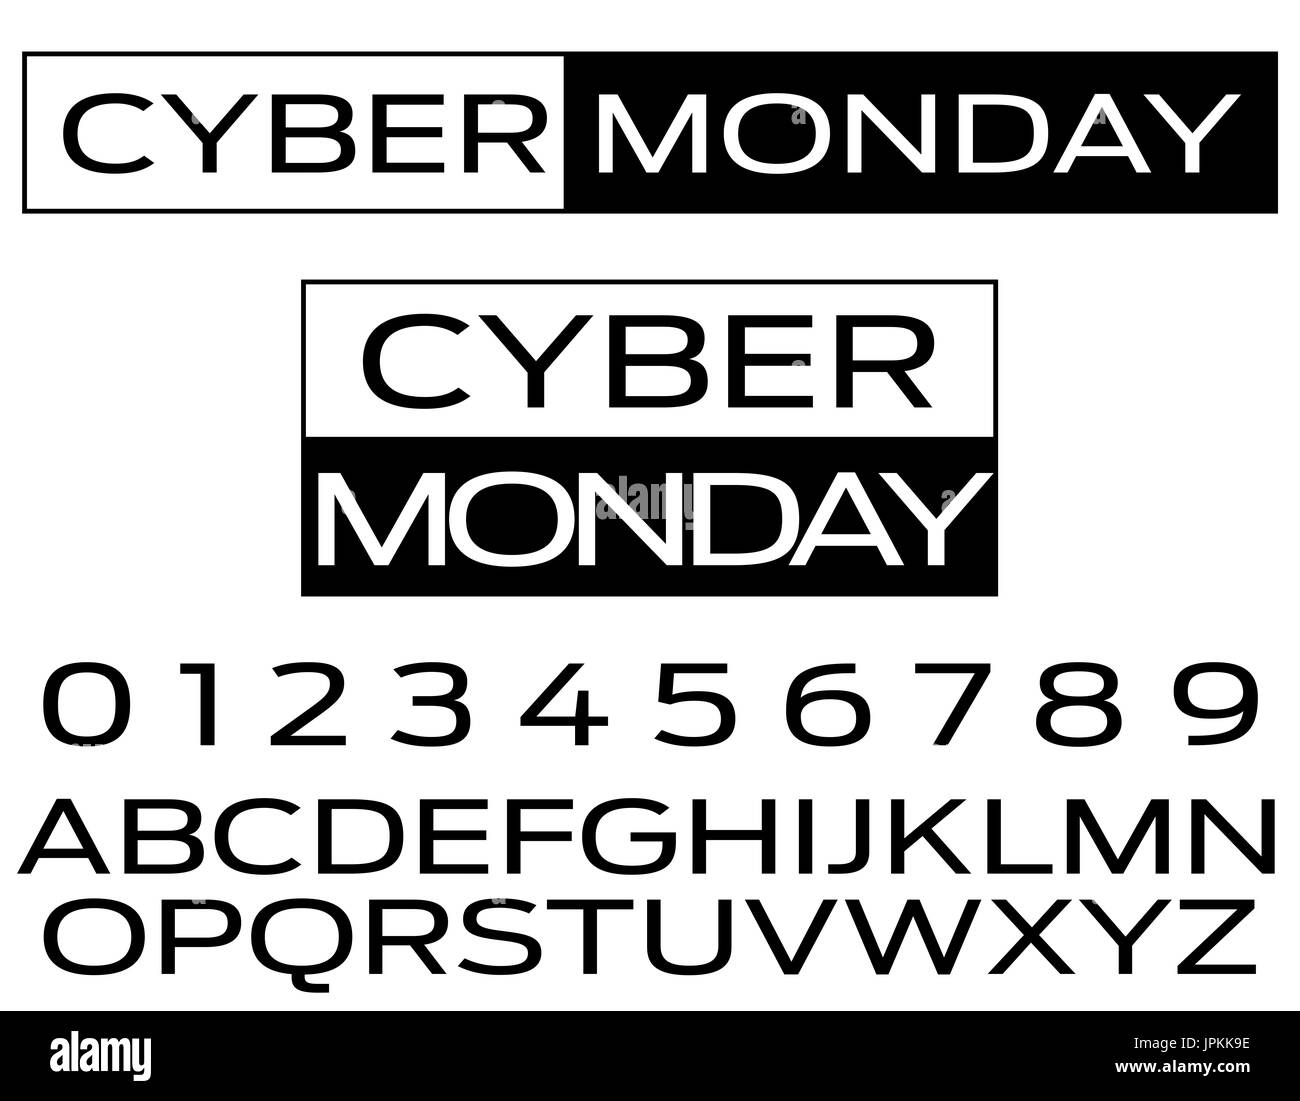 Black Friday Cyber Monday ad banner for web or print Stock Photo